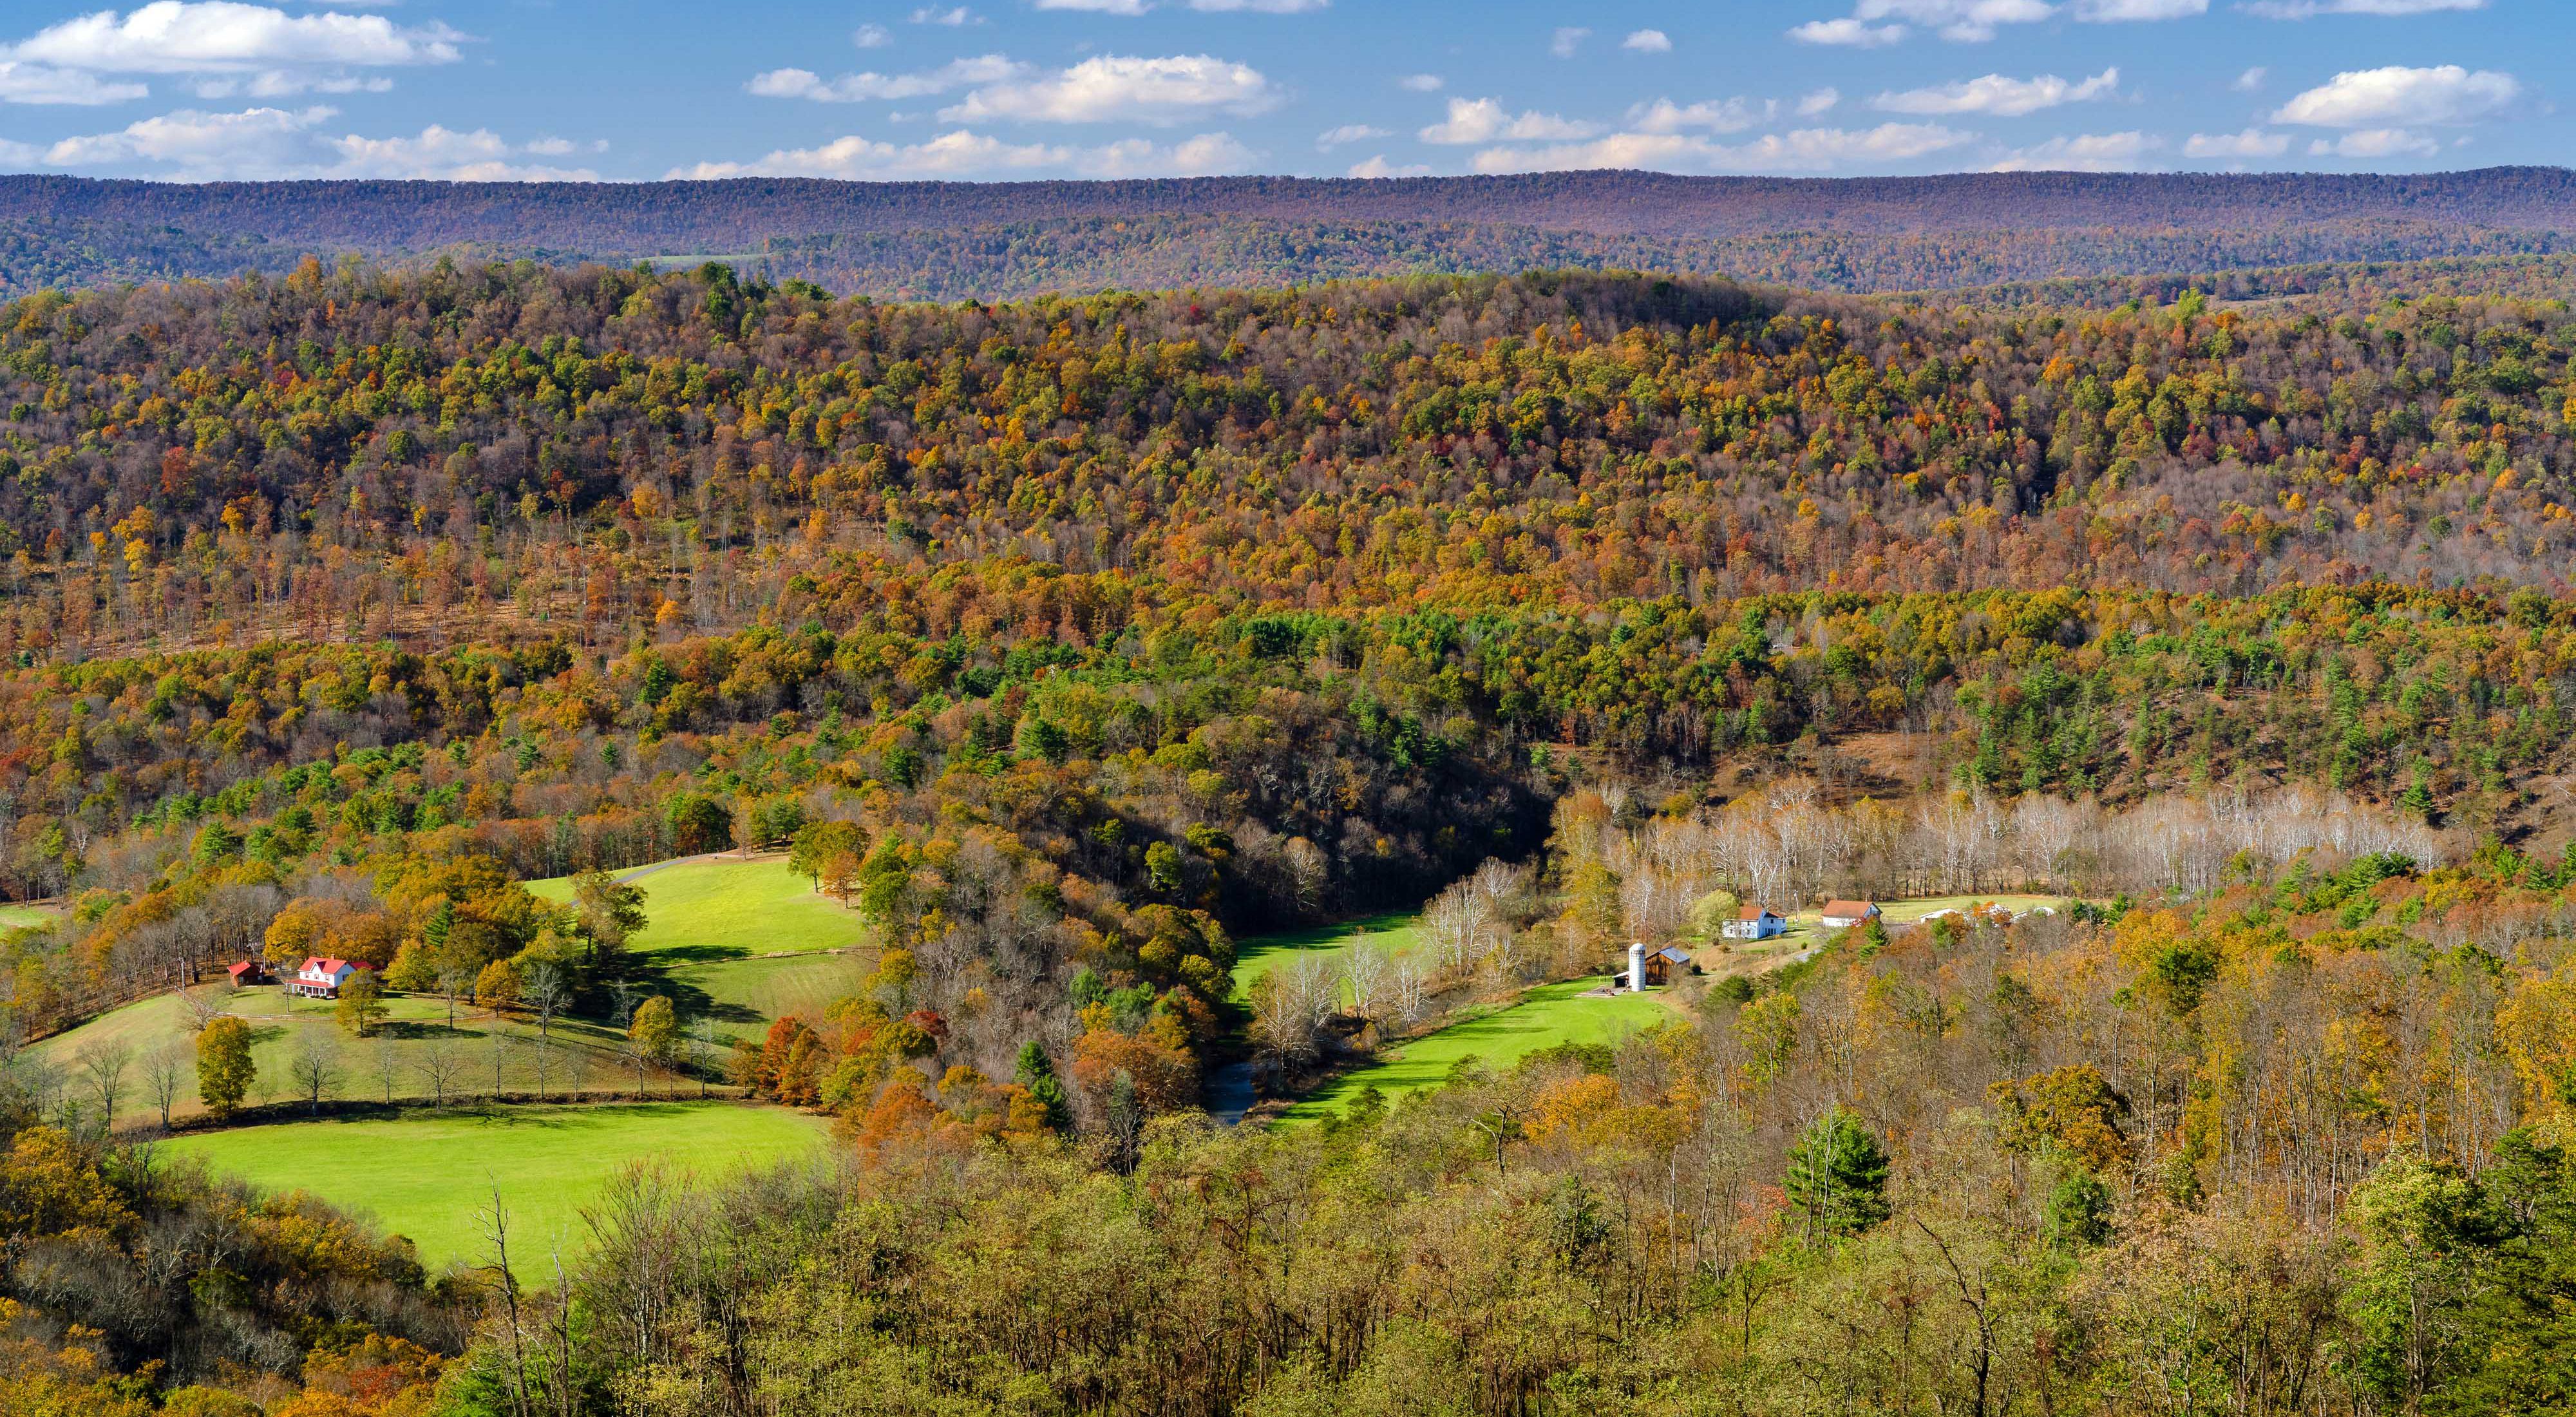 View looking out over a valley to the forested mountains beyond. Two small farms are nestled into green openings in the forest.